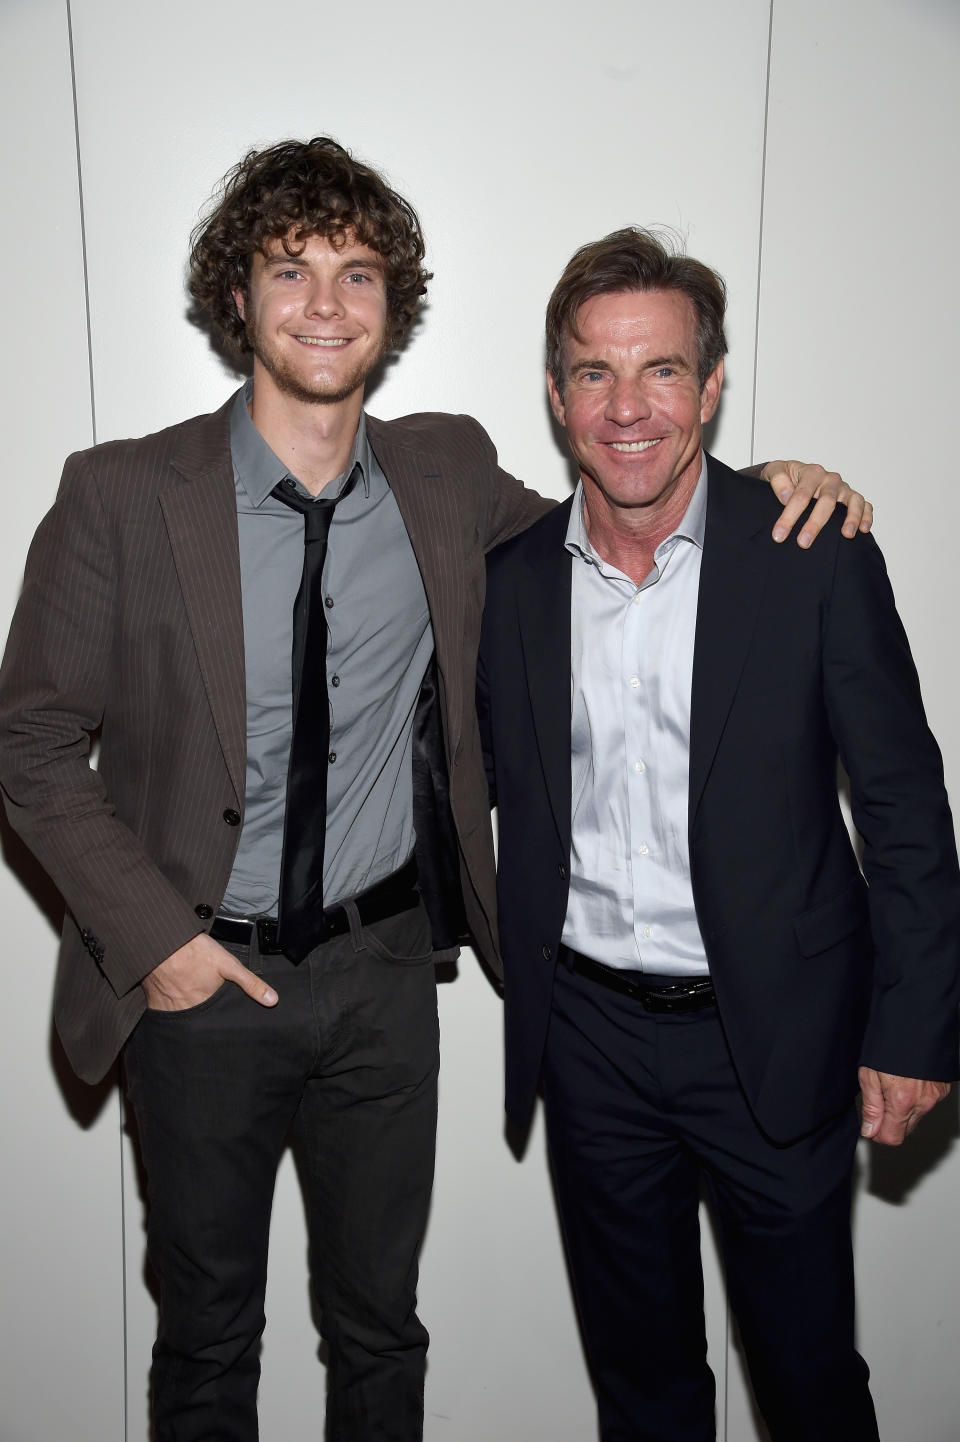 Jack Quaid and Dennis Quaid with their arms around each other